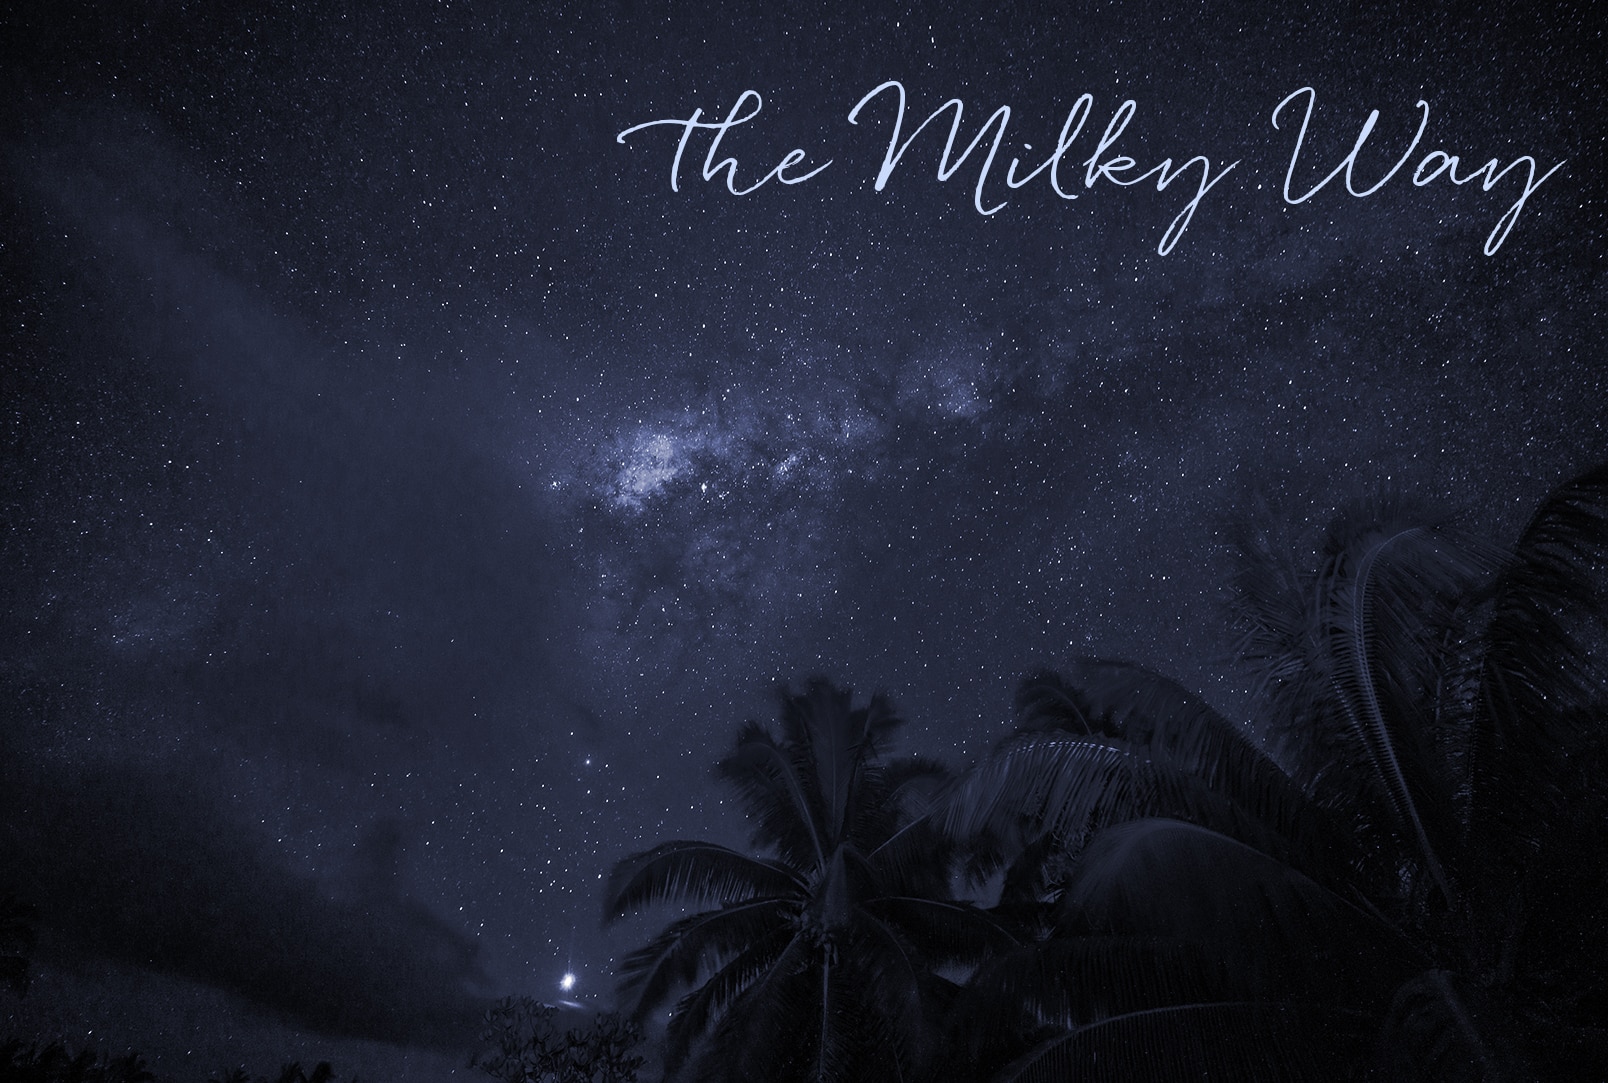 The Milky Way is our 